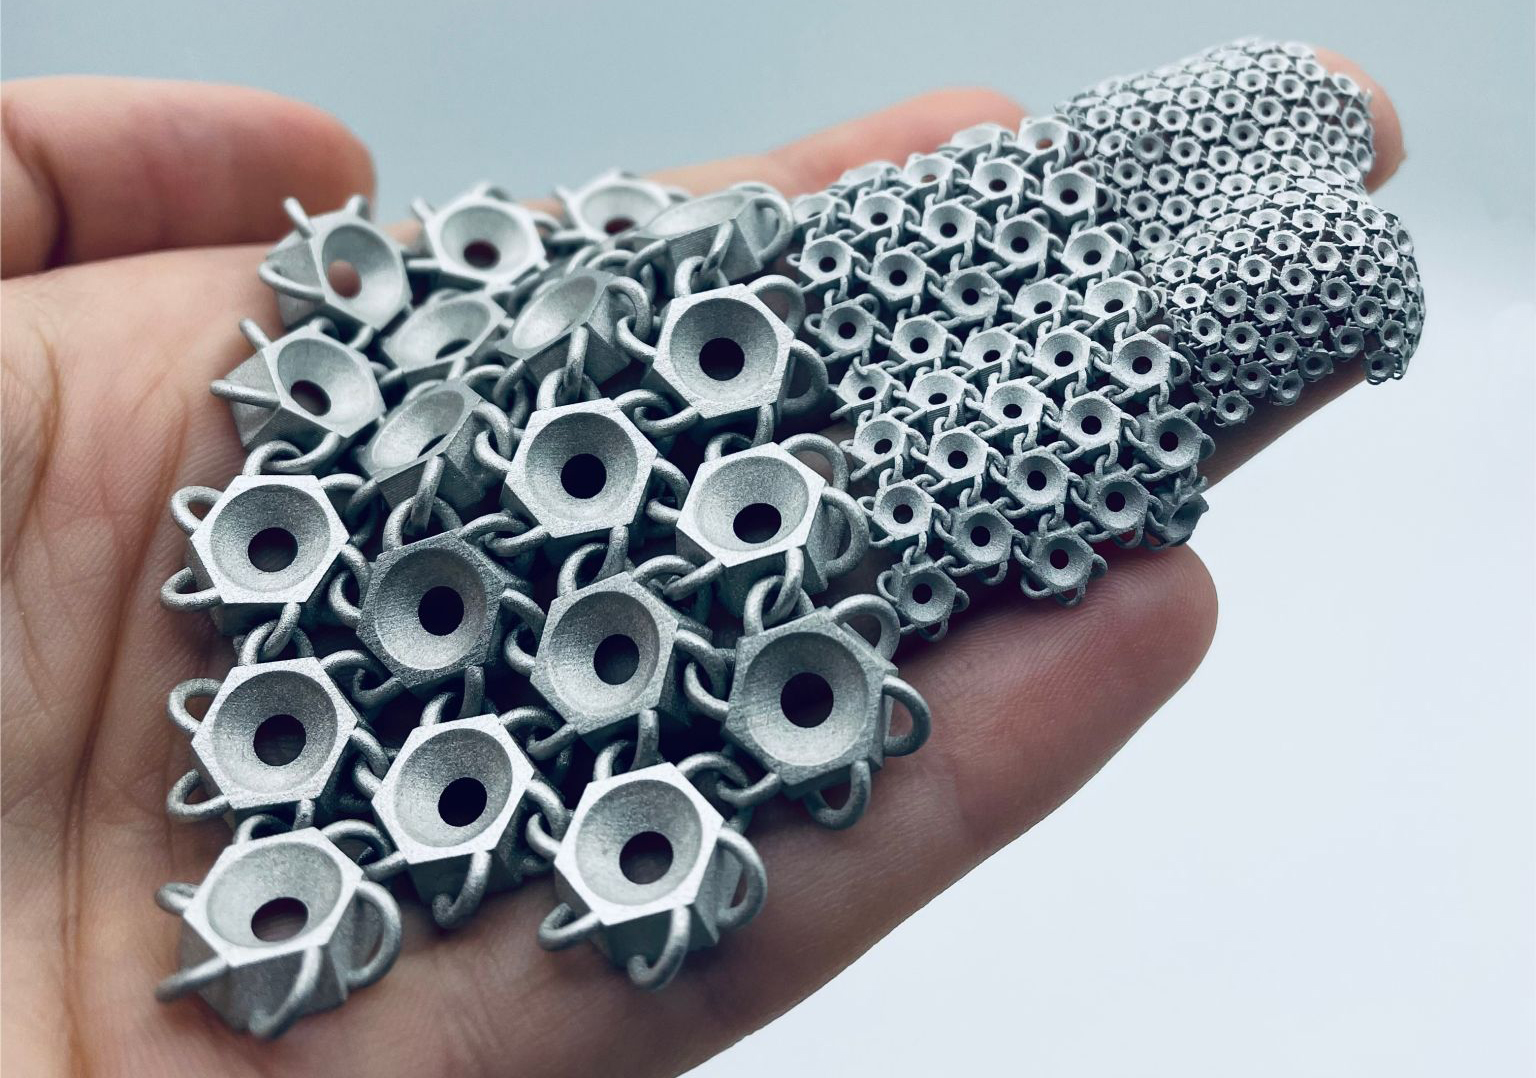 Fig. 1 Additively manufactured steel chain in three sizes, produced via LMM, in the as-sintered stated prior to surface polishing (Courtesy Incus)